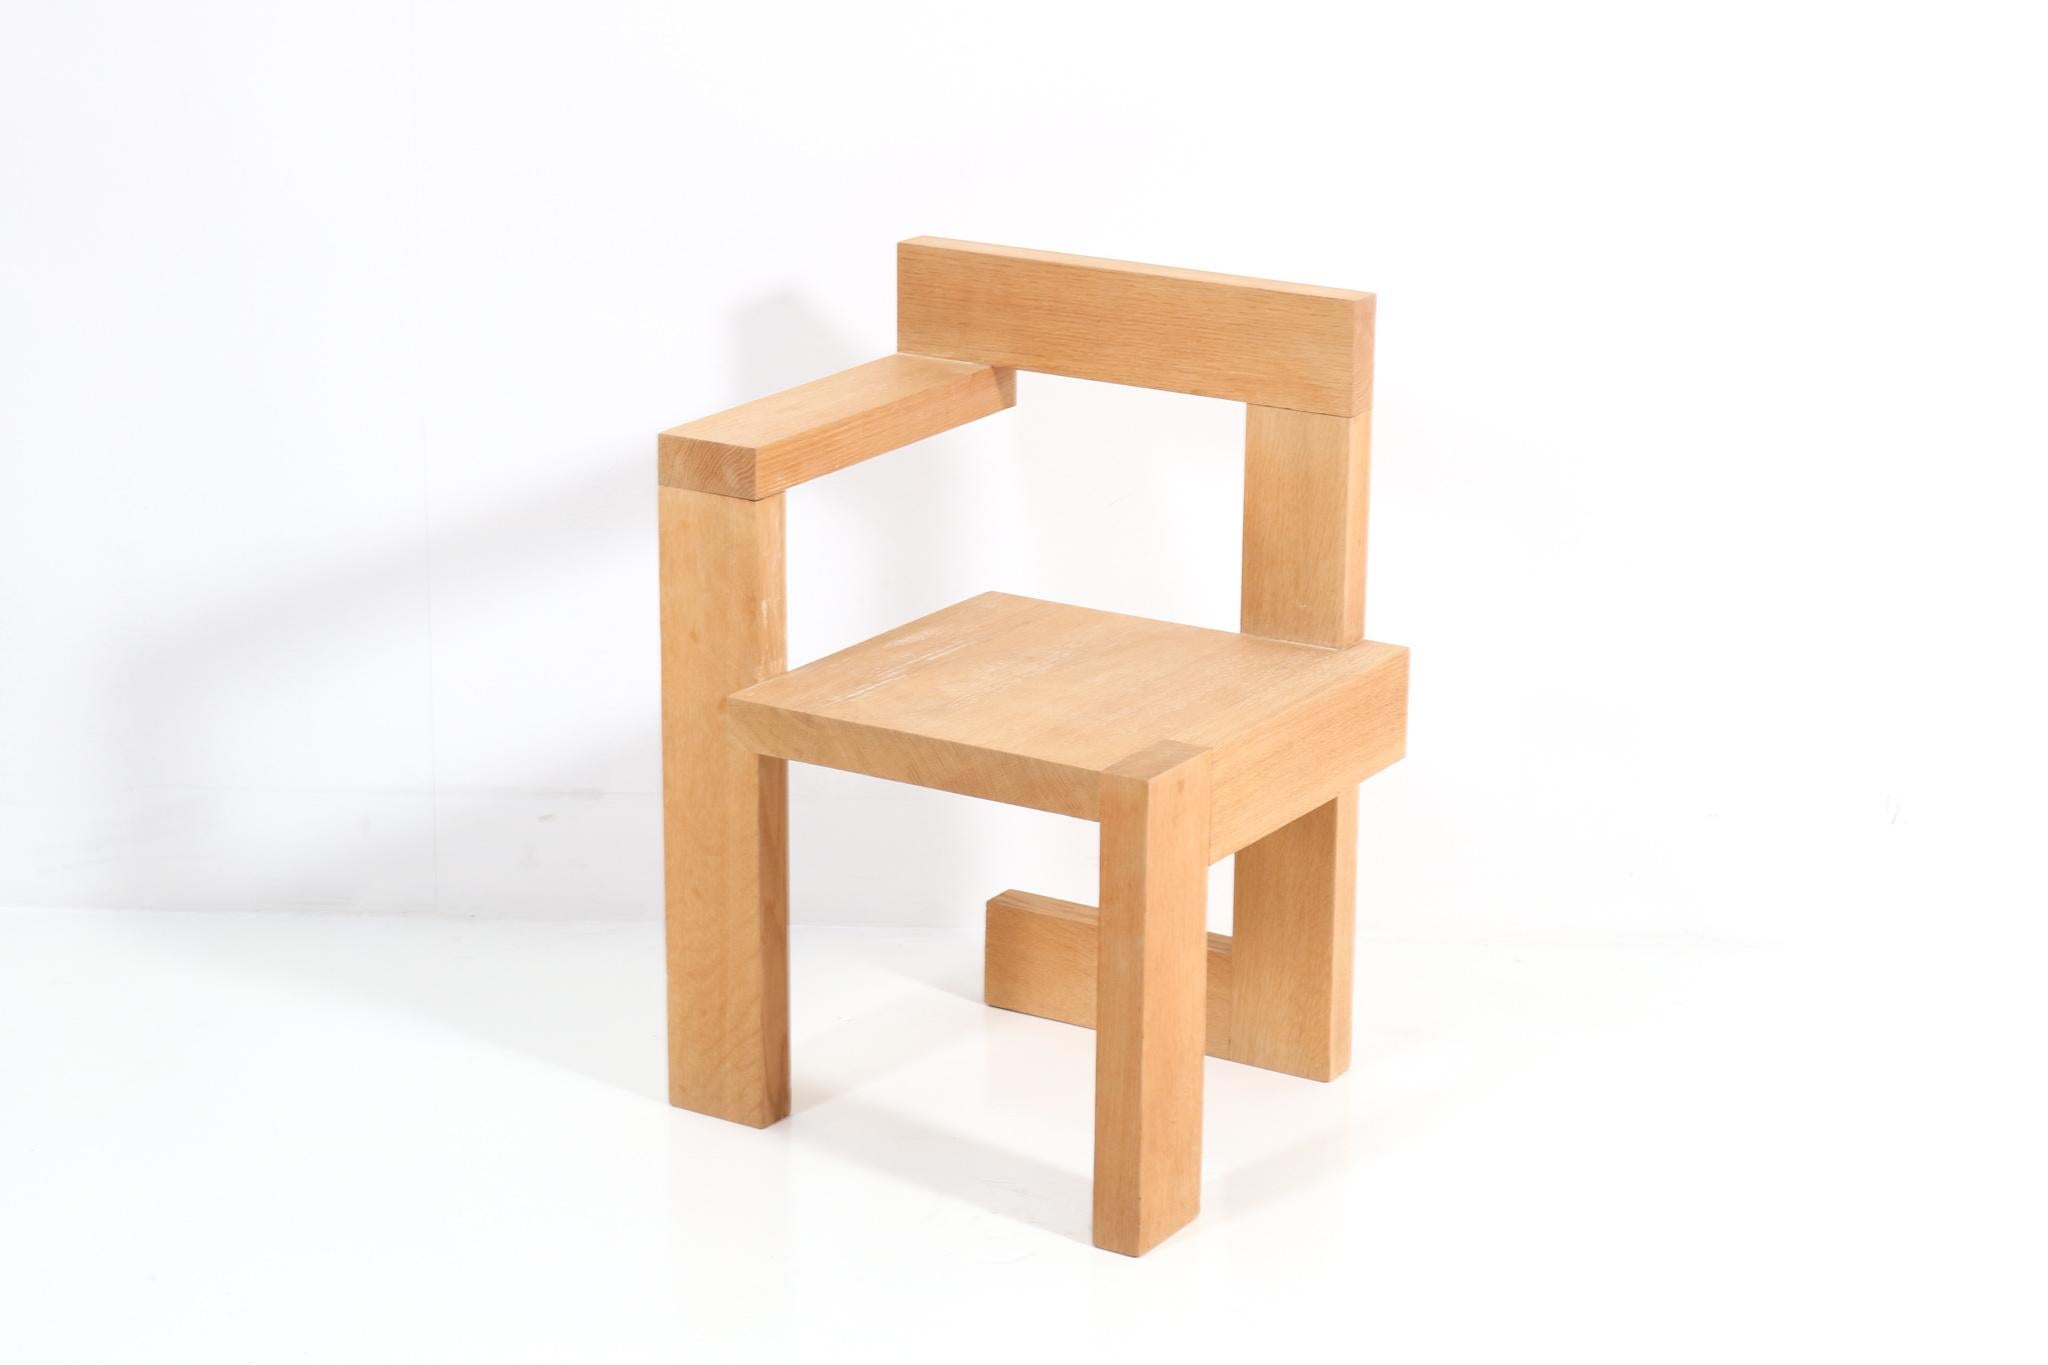 Wonderful Modernist Steltman chair by Gerrit Rietveld.
This version is constructed on the basis of Rietveld's original 1963 drawing.
The stunning 1963 Steltman chair was originally commissioned by Steltman jewelers in The Hague, as seating for